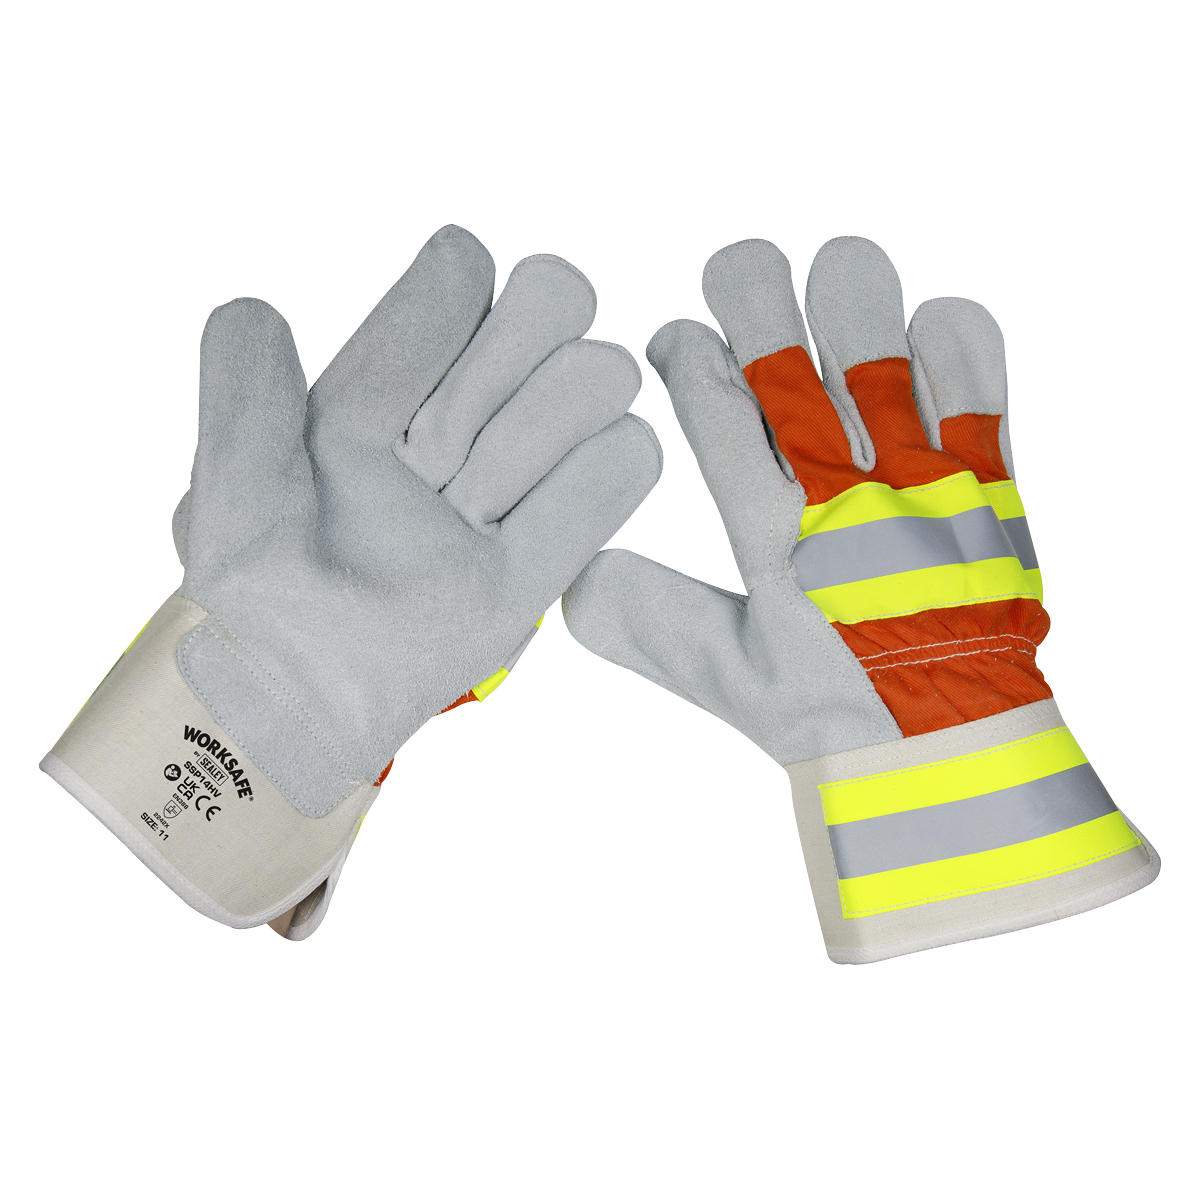 Reflective Rigger's Gloves Pack of 6 Pairs